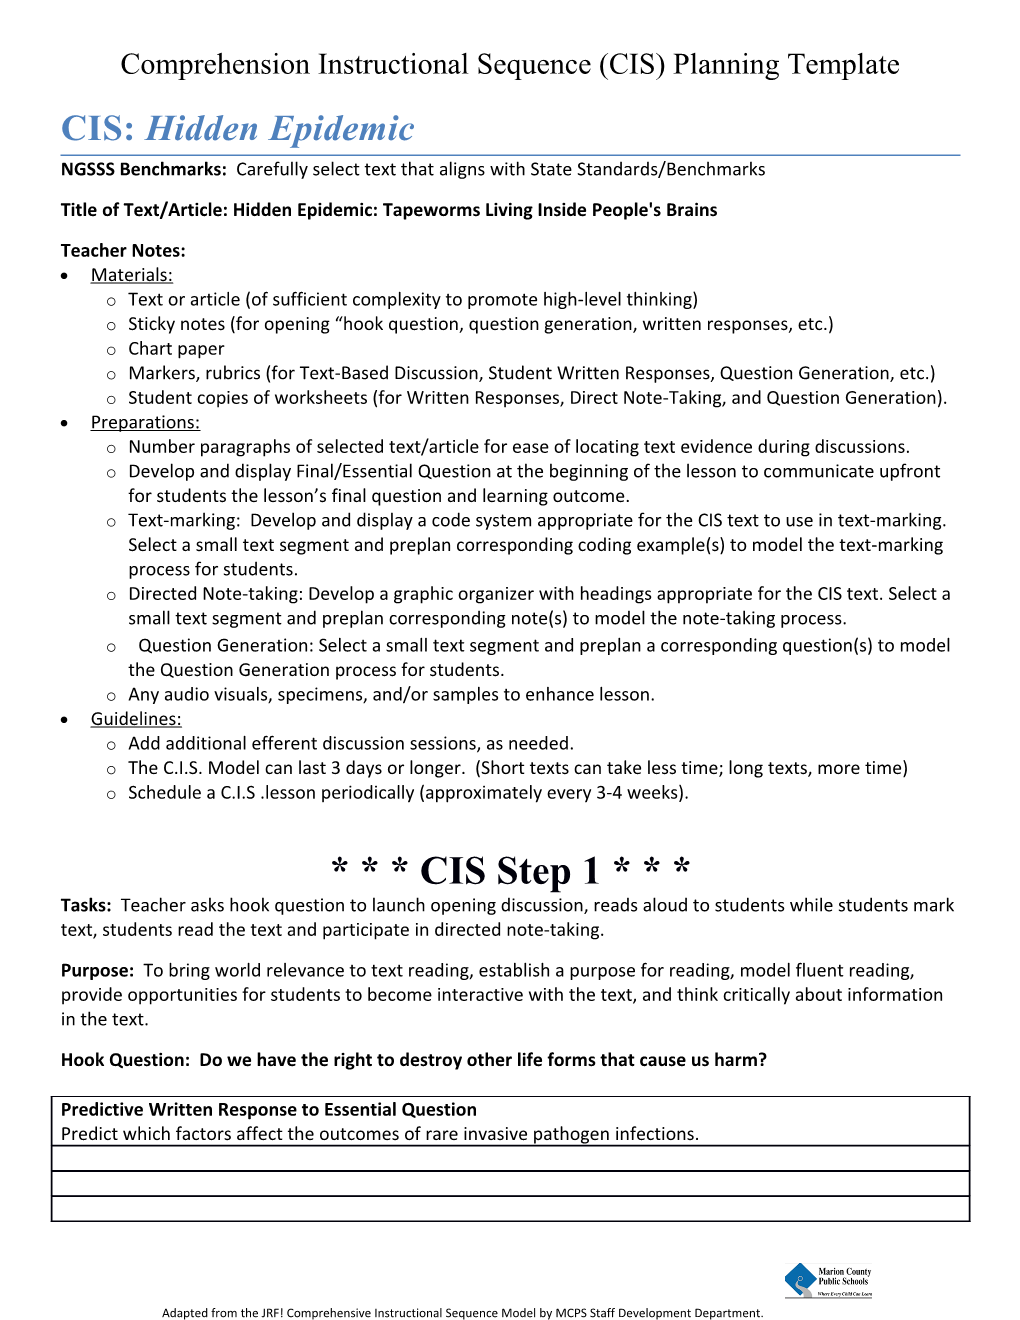 Comprehension Instructional Sequence (CIS) Planning Template